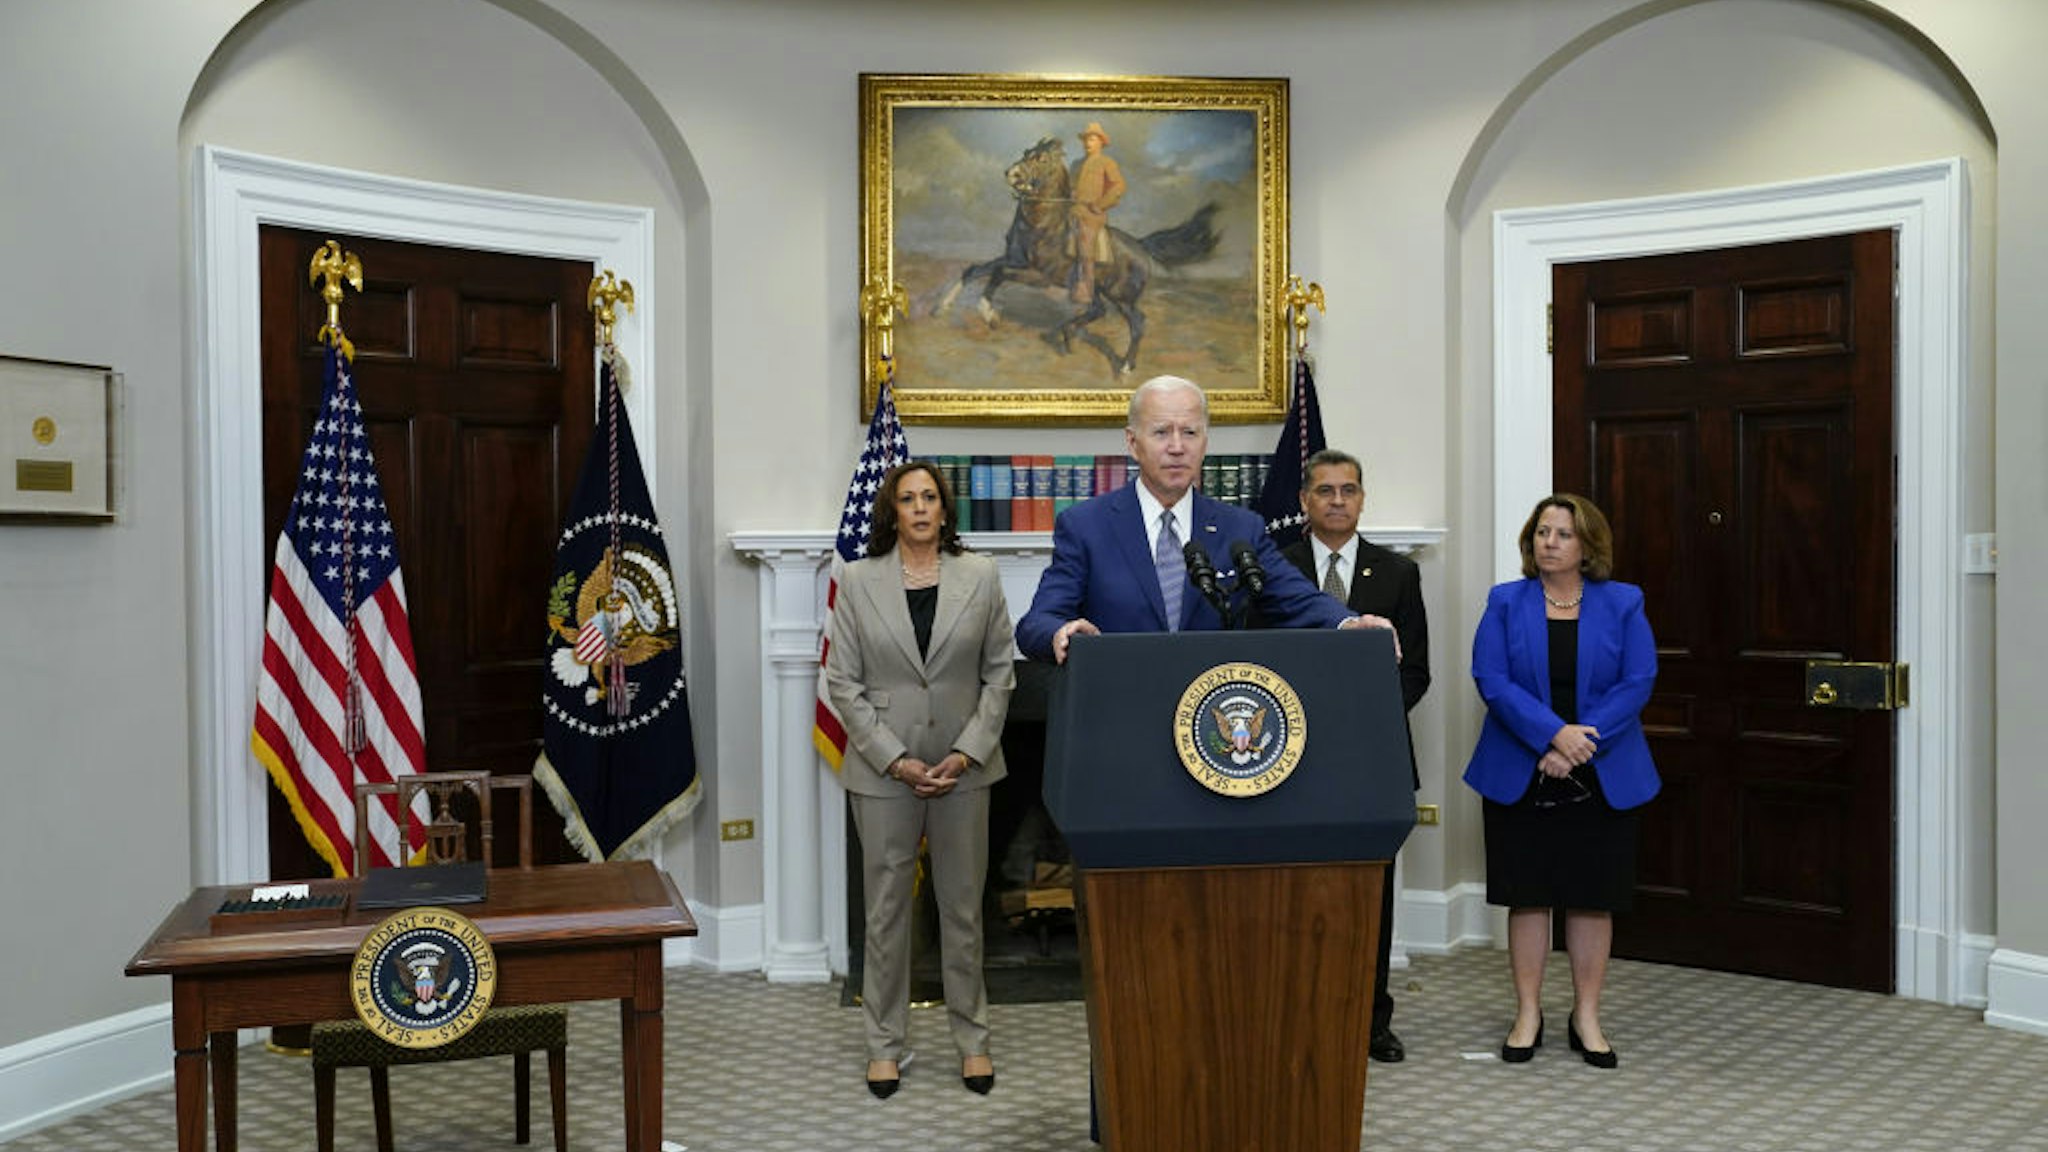 US President Joe Biden, center, speaks in the Roosevelt Room of the White House in Washington, D.C., US, on Friday, July 8, 2022. Biden issued an executive order intended to preserve access to abortion after advocates and Democratic lawmakers have demanded that the White House take more robust action following last month's Supreme Courts decision to overturn Roe v. Wade.